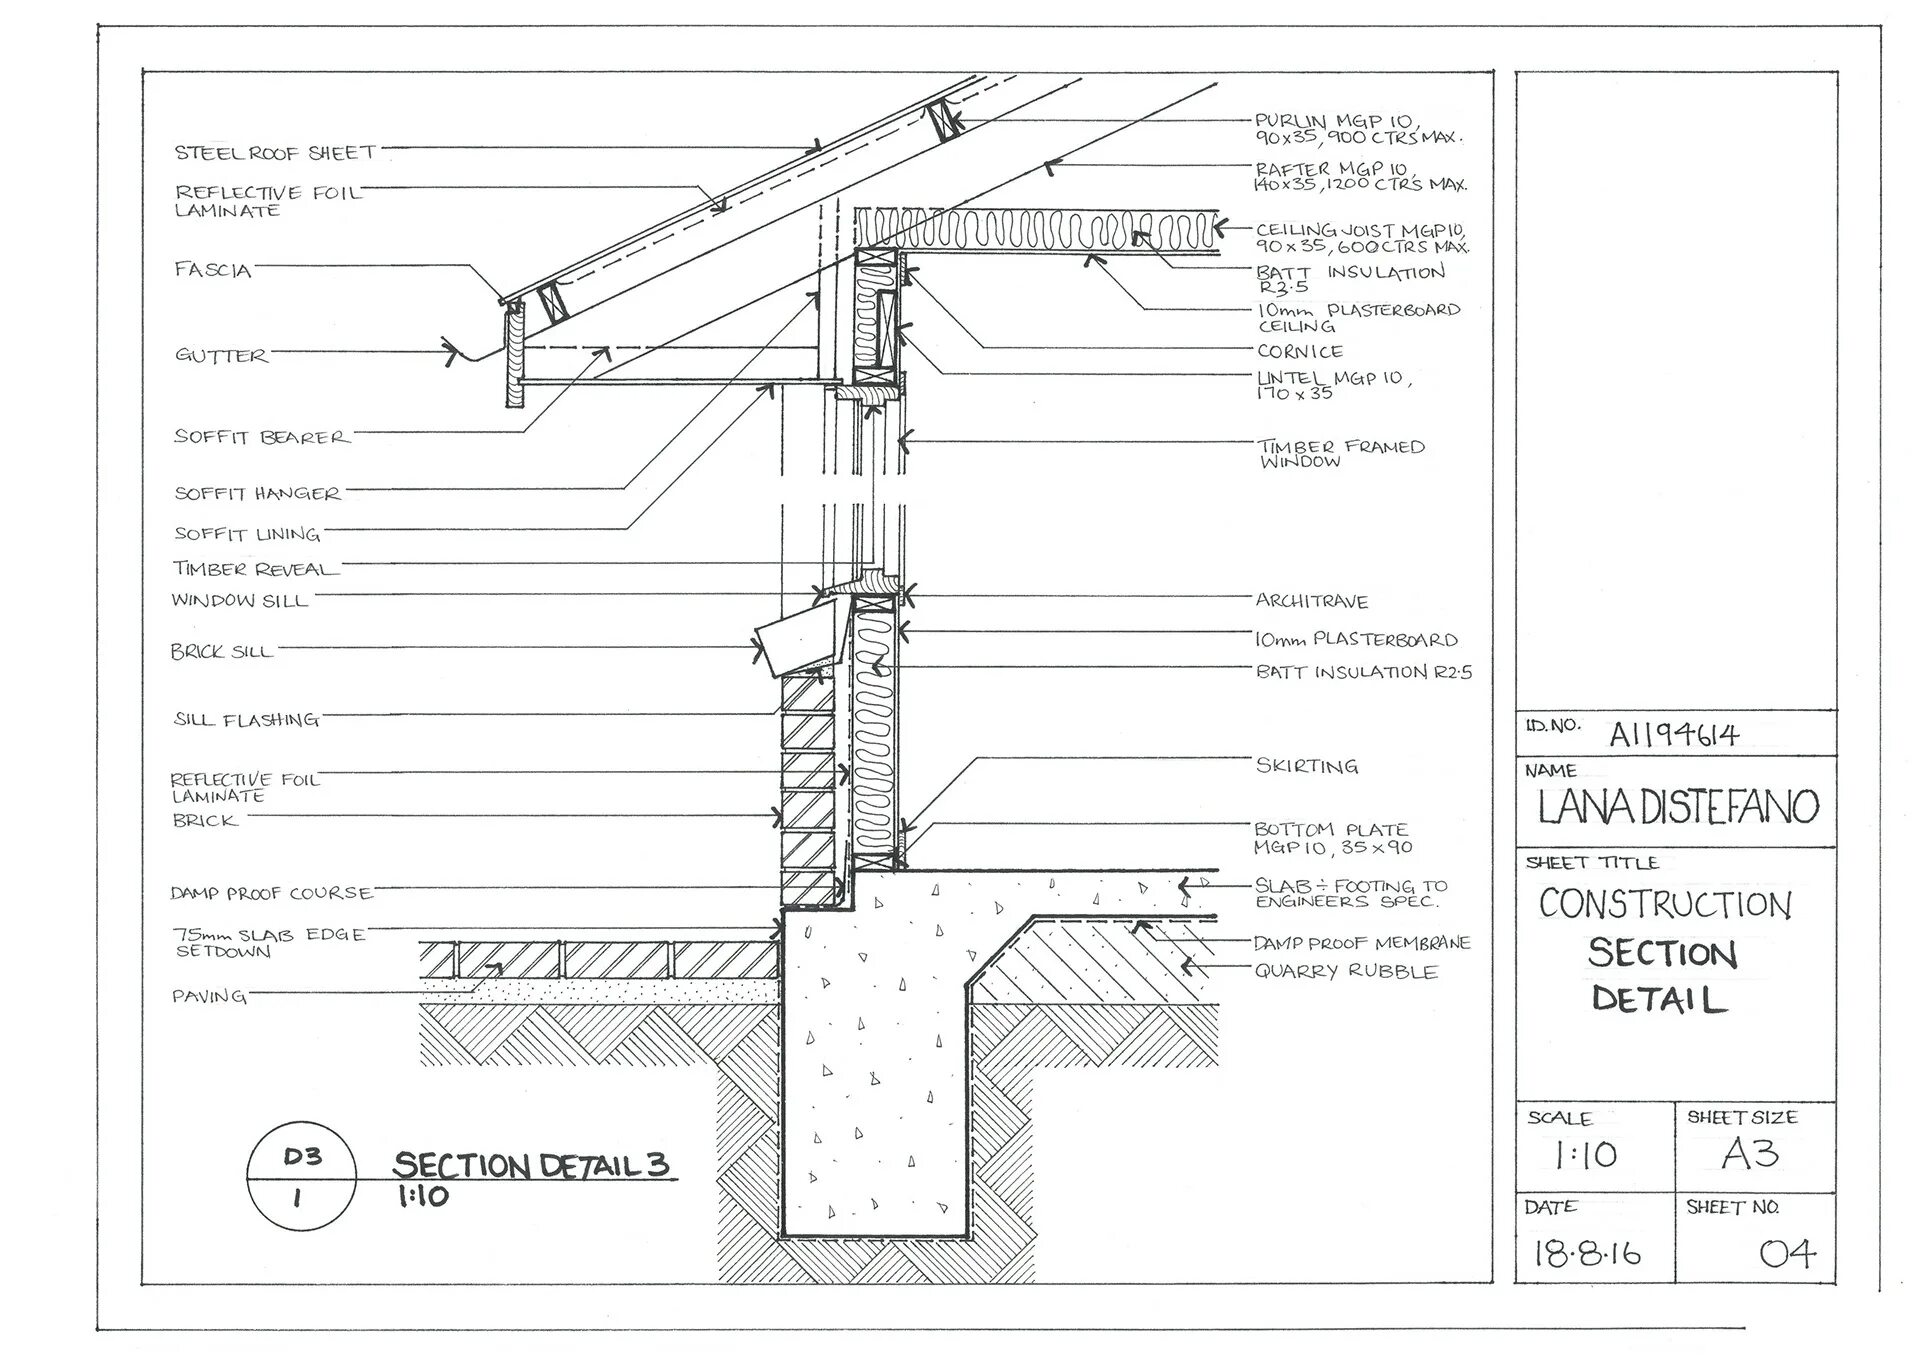 Section. Detail drawing. Measurement in Construction. Typical Wall Section detail. Section and detail indicators.